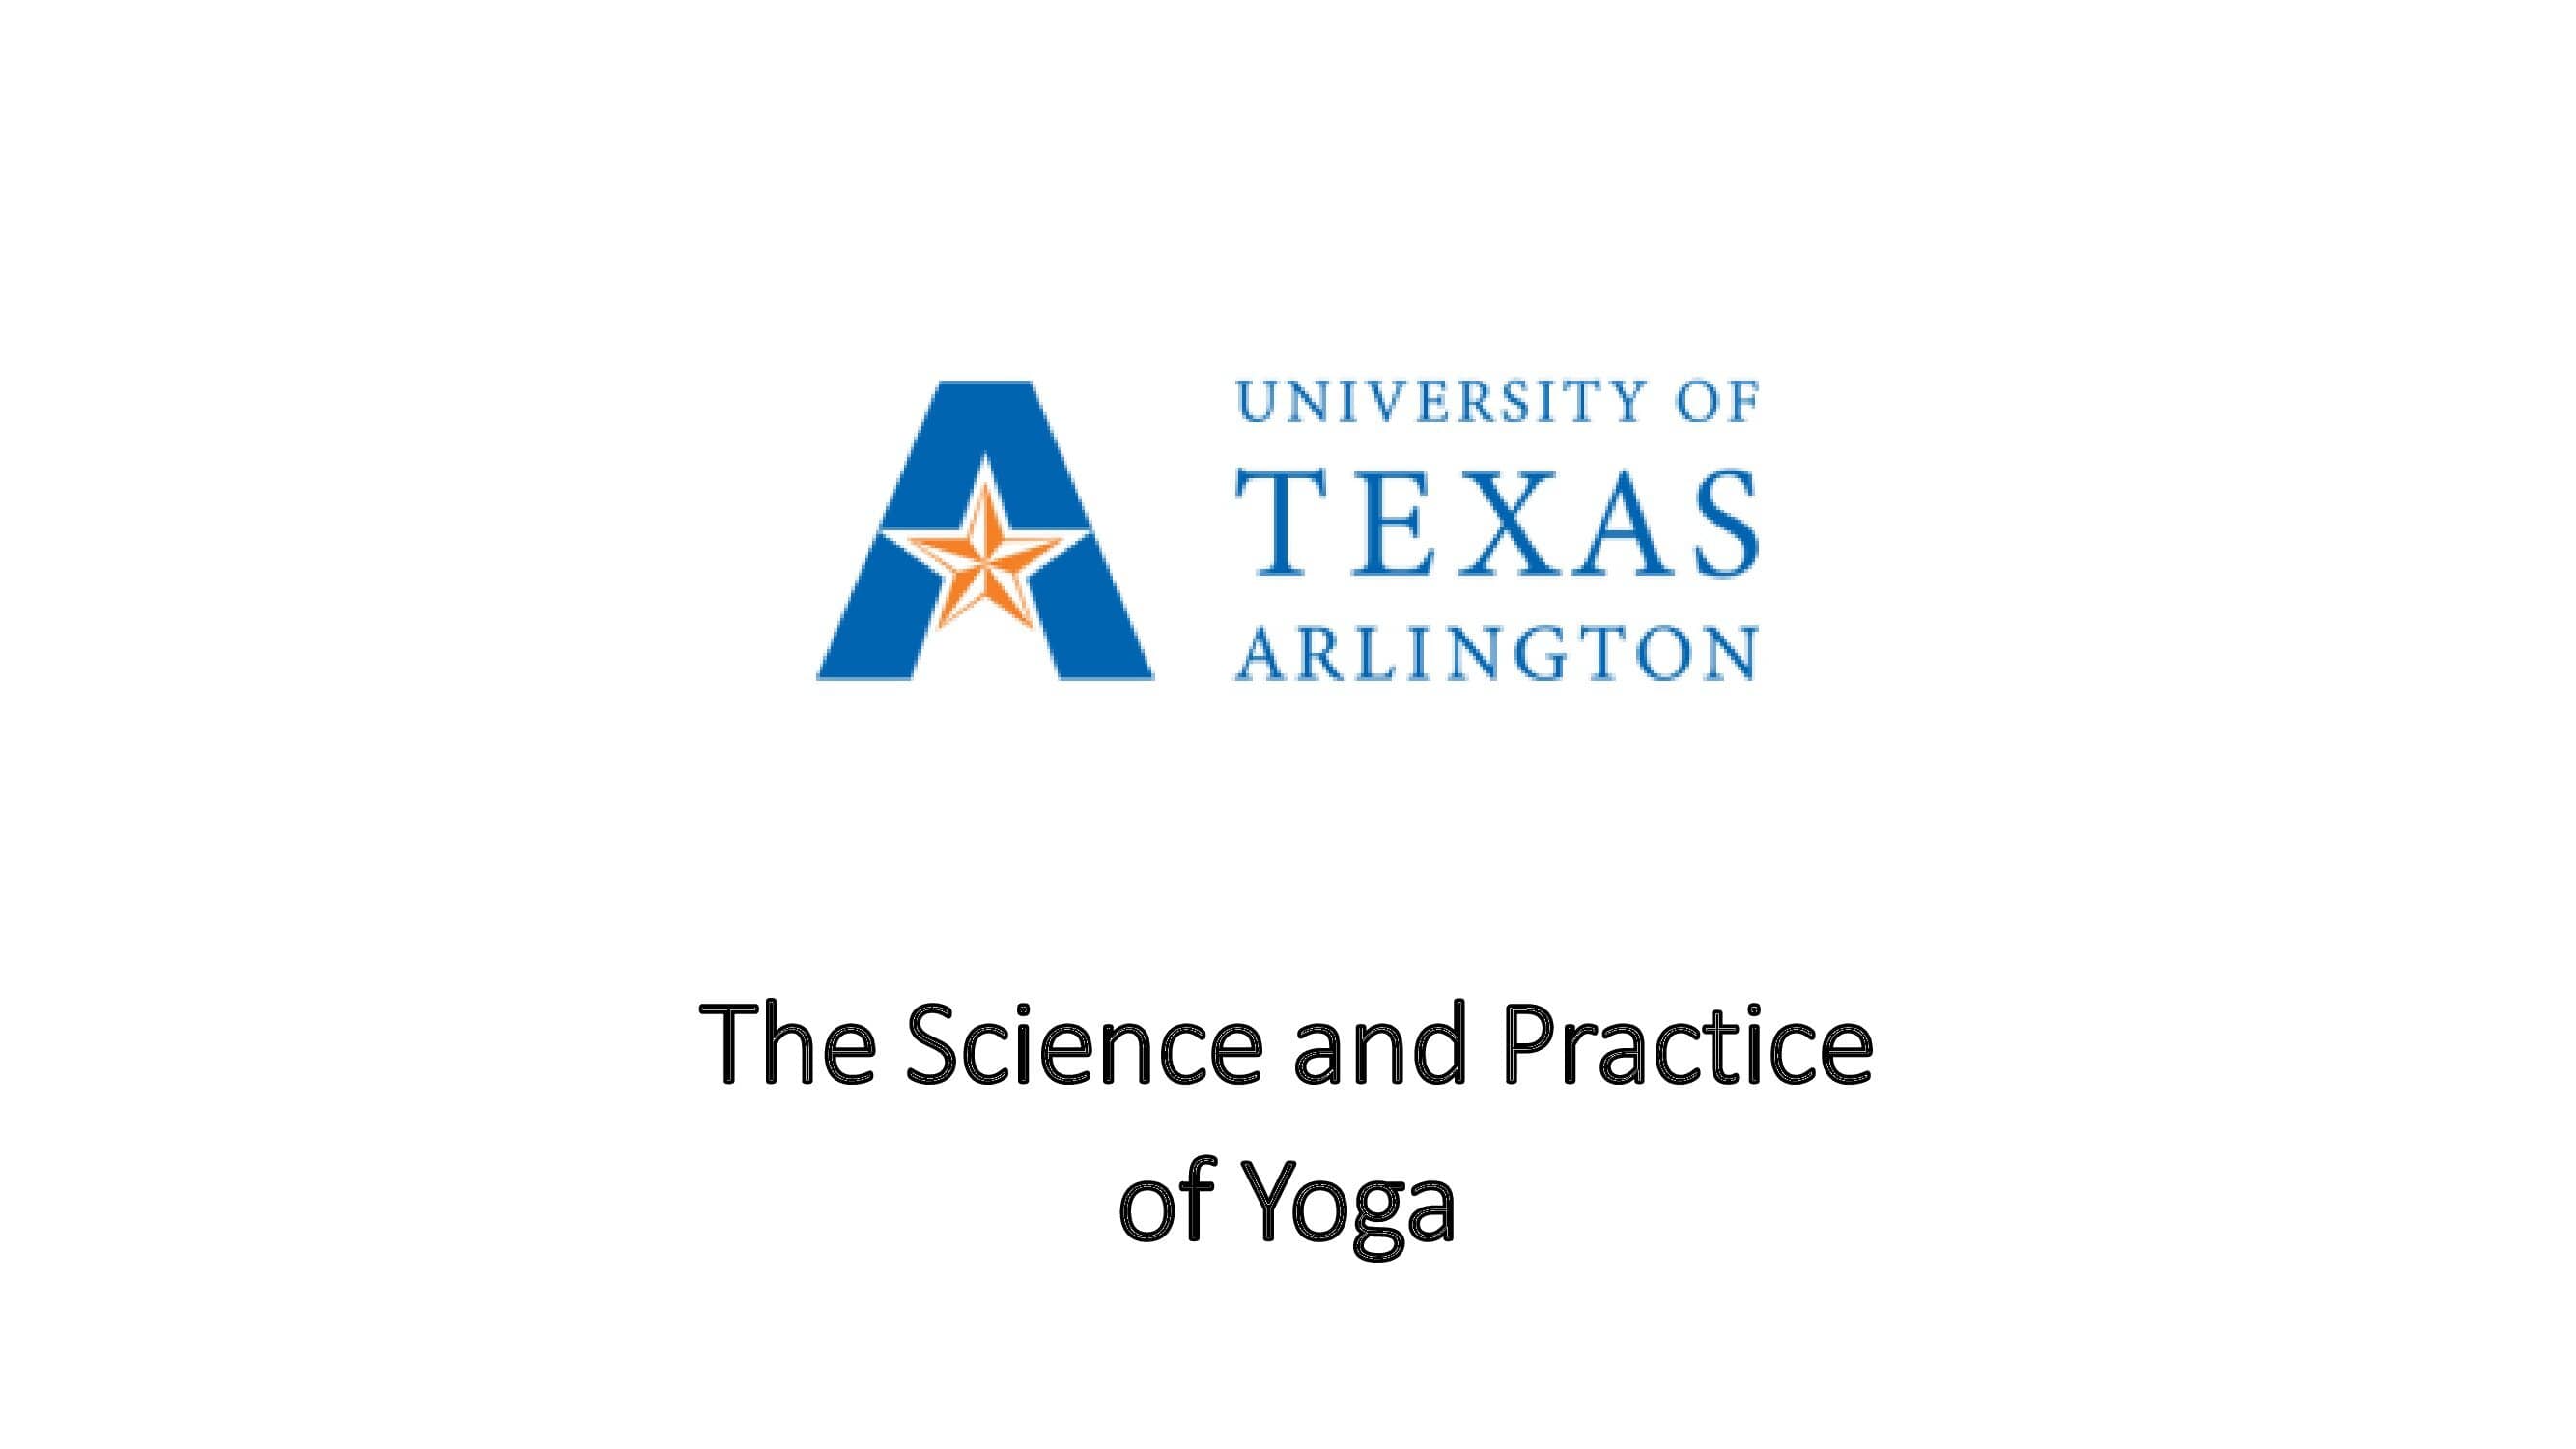 The Science and Practice of Yoga